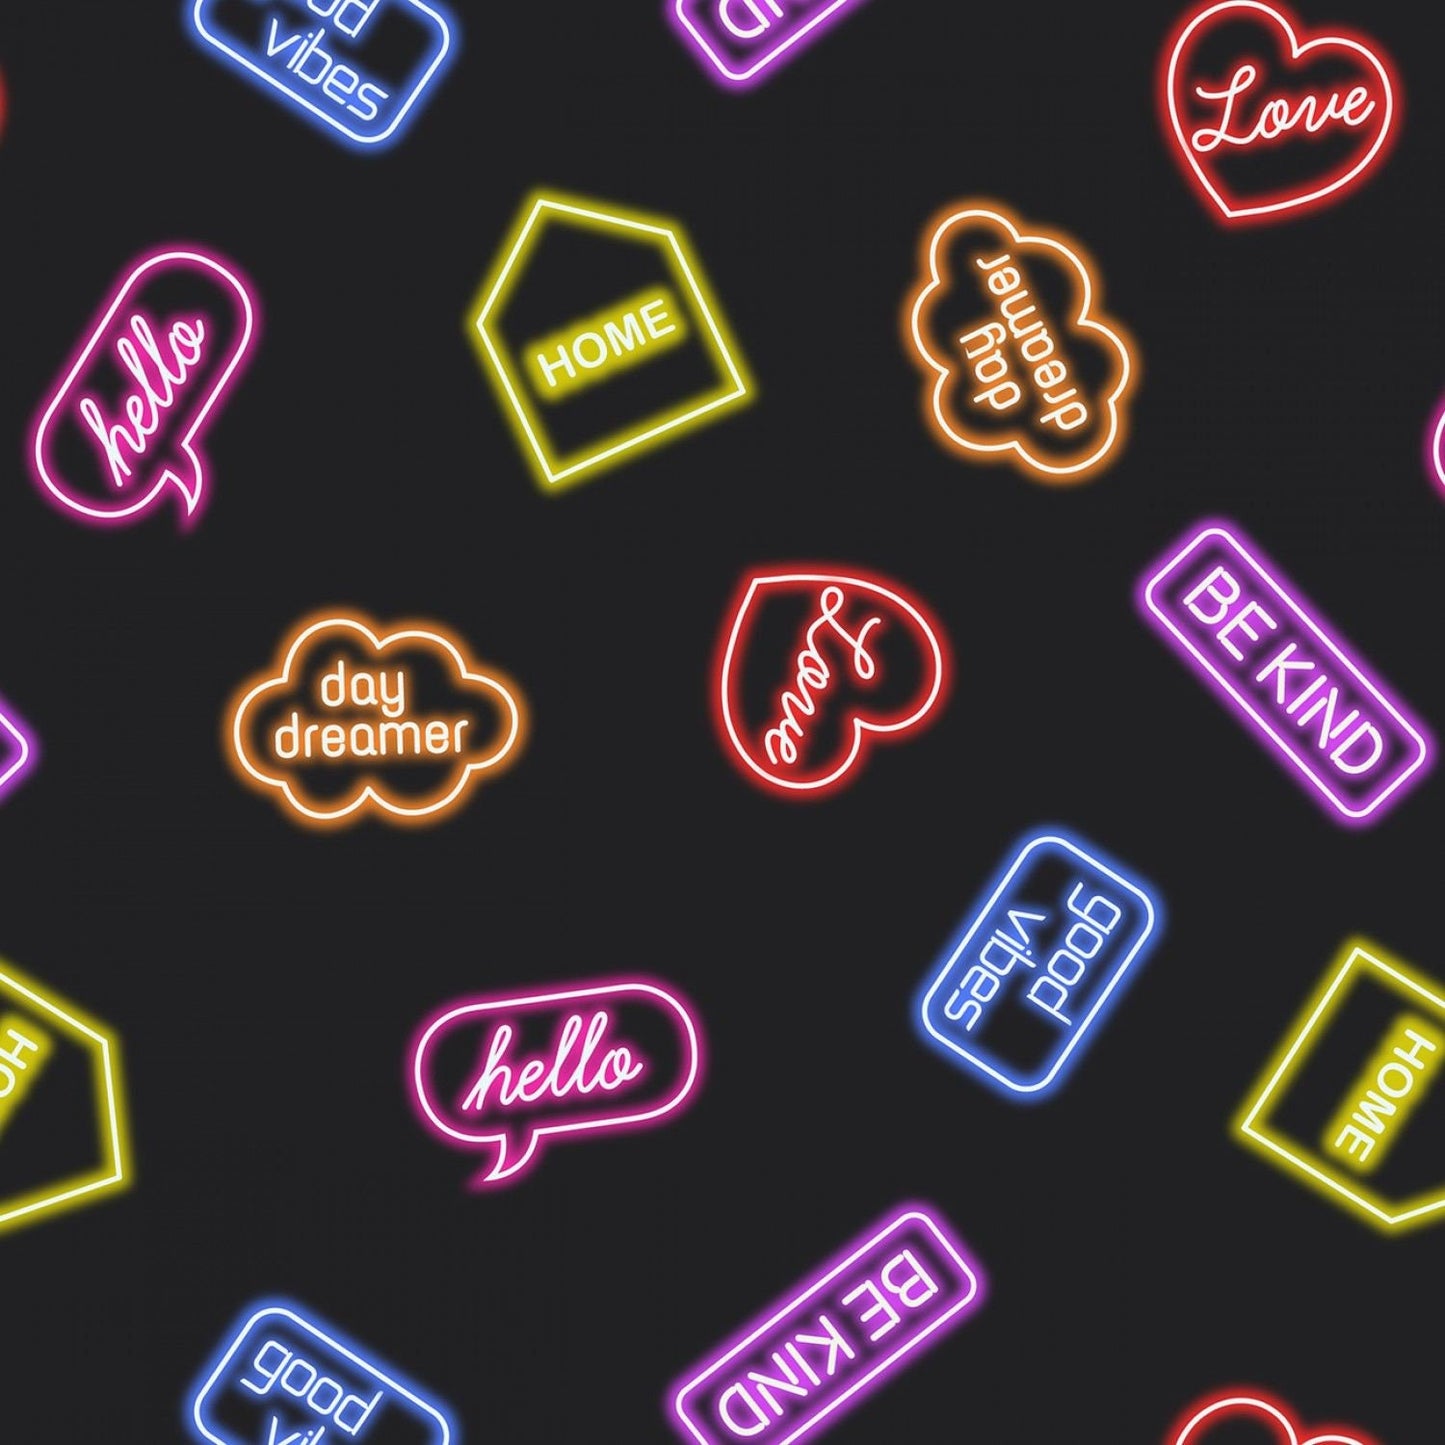 Small Things Glow Neon Signs on Black SM37-3 Glow in the Dark Cotton Woven Fabric